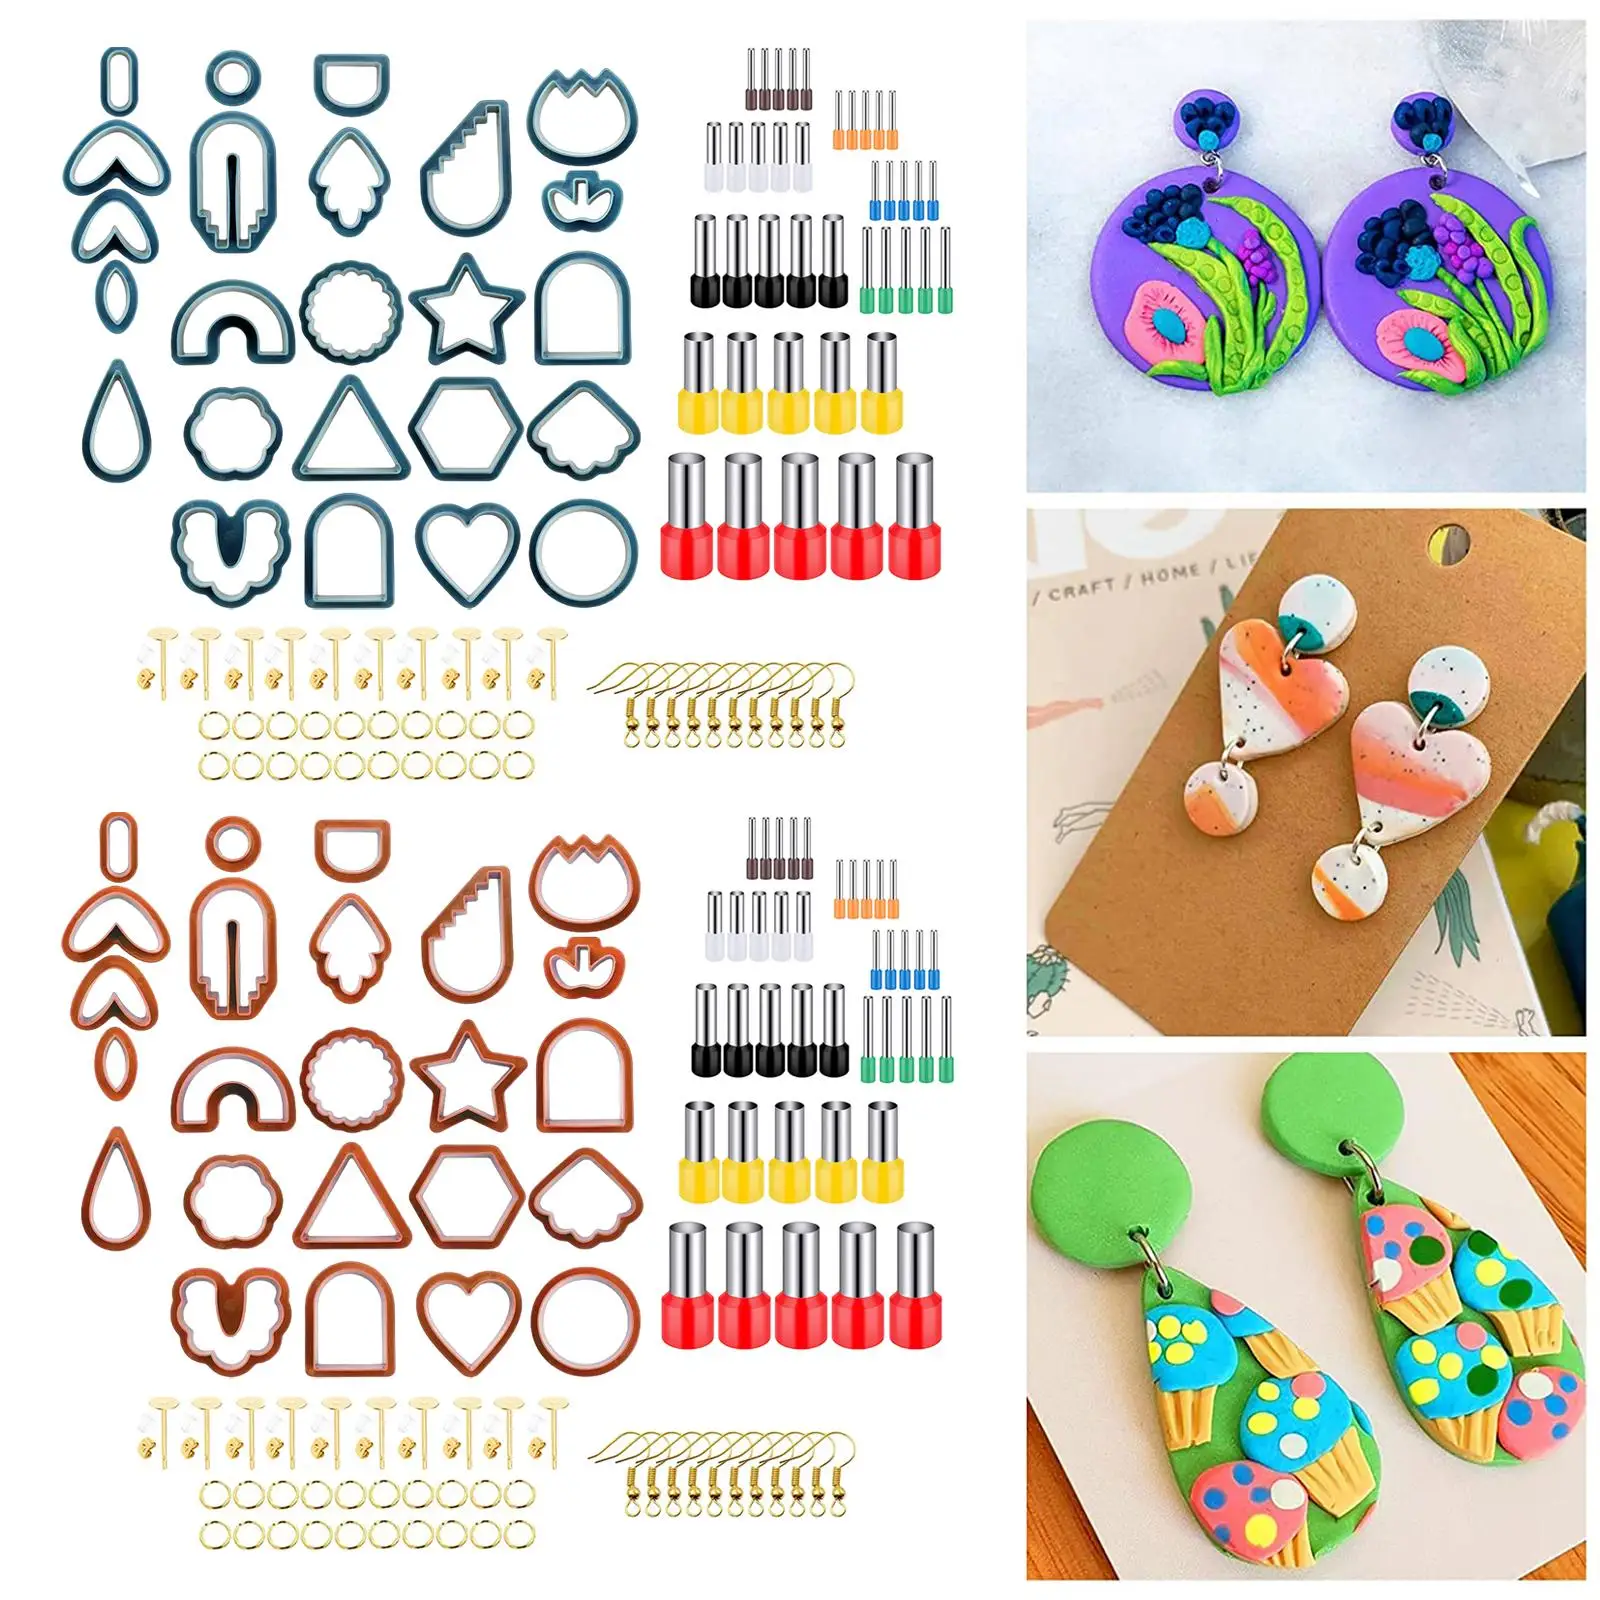 114 Pieces Polymer Art Different Shapes Earring Cutter DIY Earrings Ceramic Craft Jewelry Pendant Making